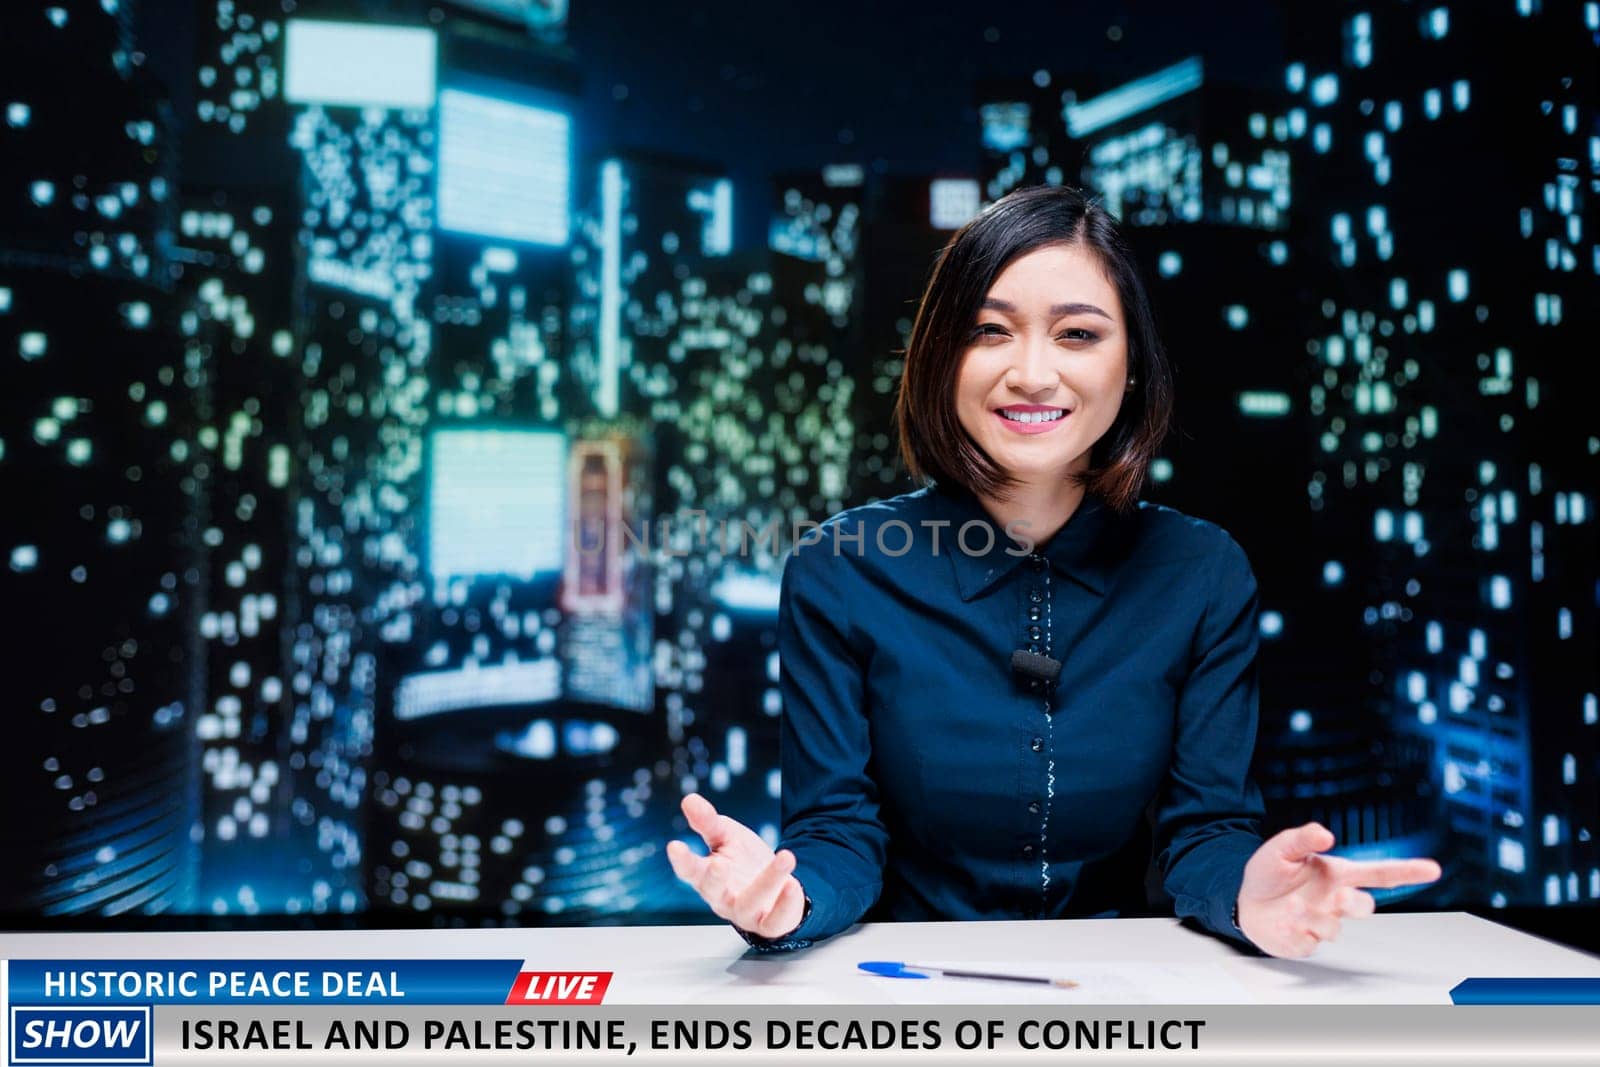 Woman reports historic peace deal by DCStudio